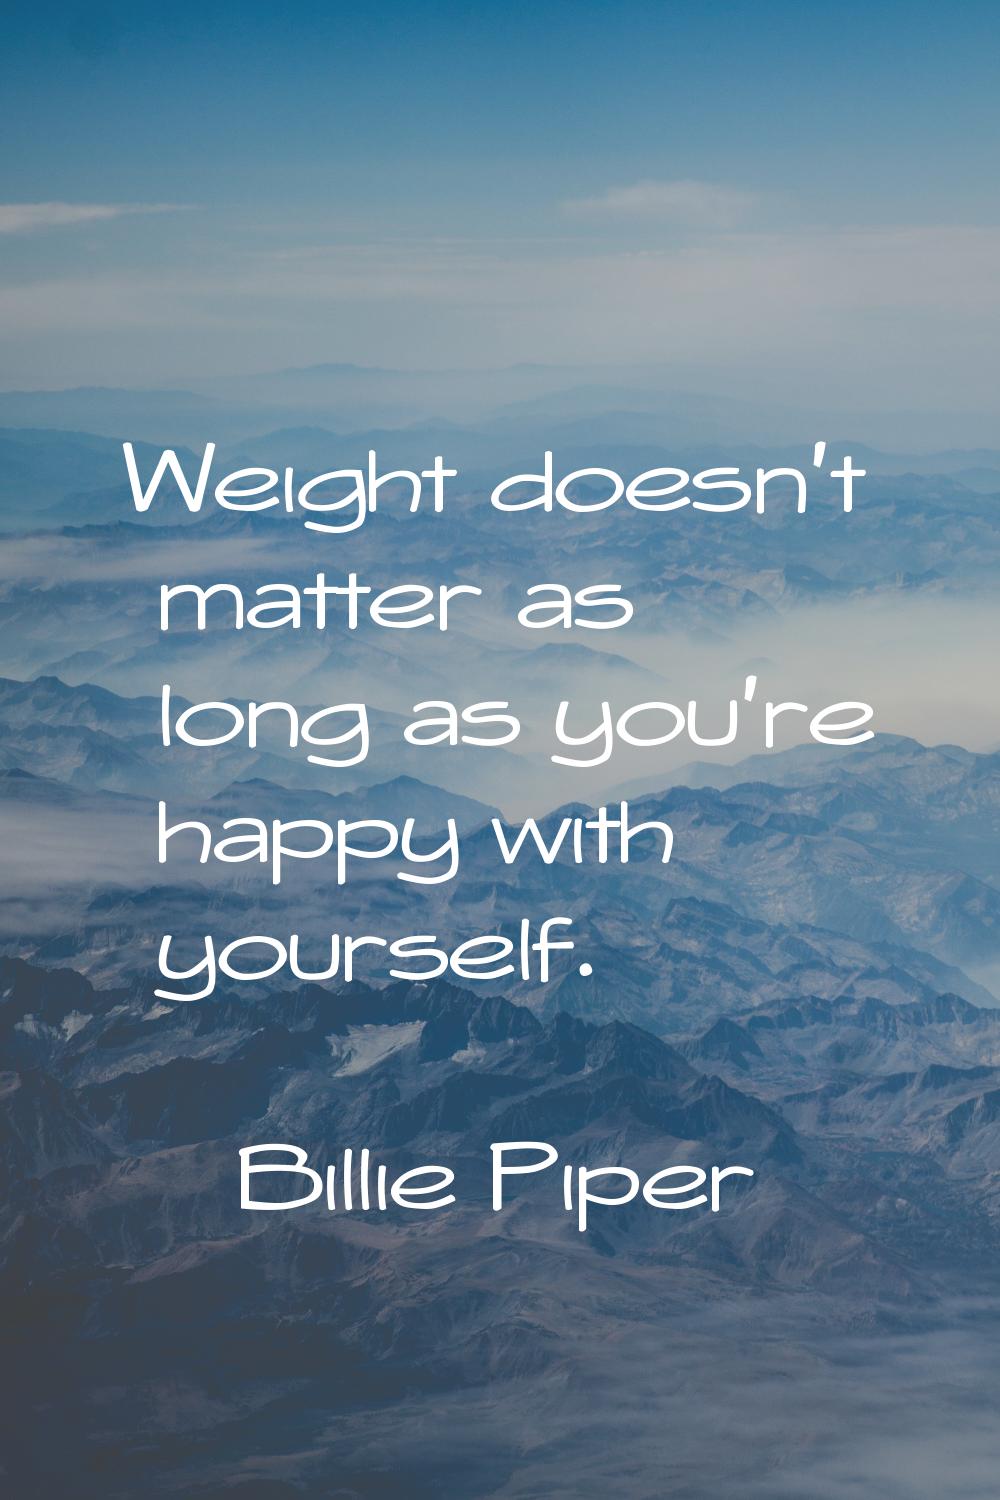 Weight doesn't matter as long as you're happy with yourself.